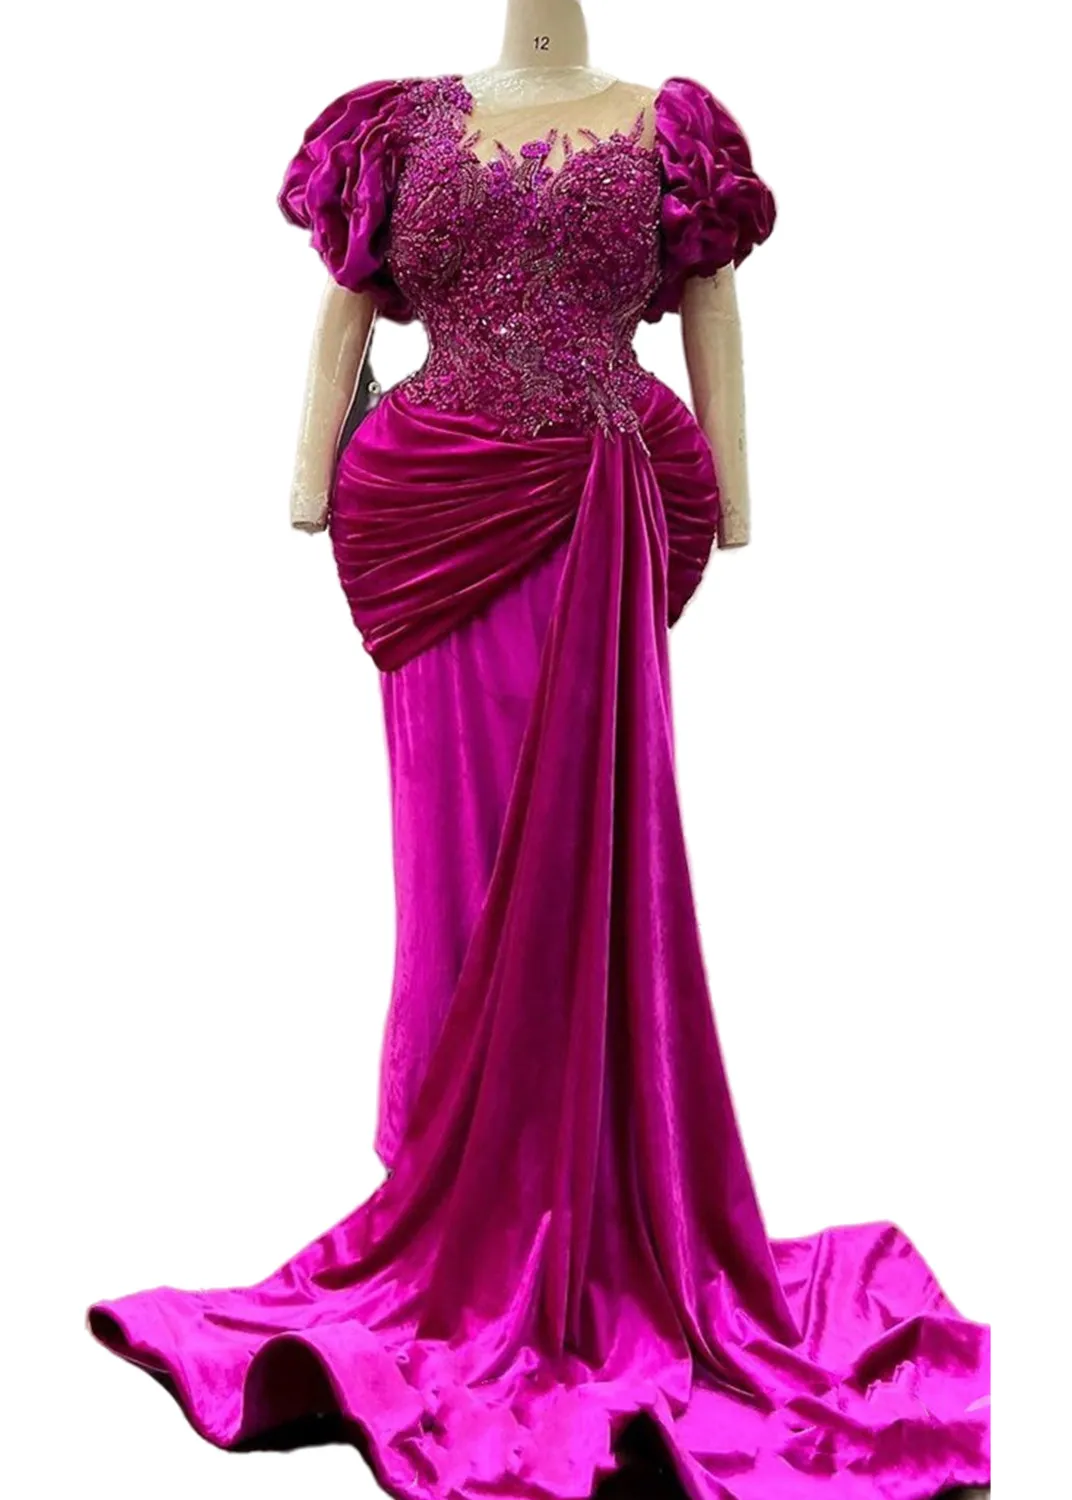 Arabic Aso Ebi Plum Mermaid Prom Dresses Lace Beaded Crystals Evening Formal Party Second Reception Birthday Engagement Gowns Dress Zj703 407